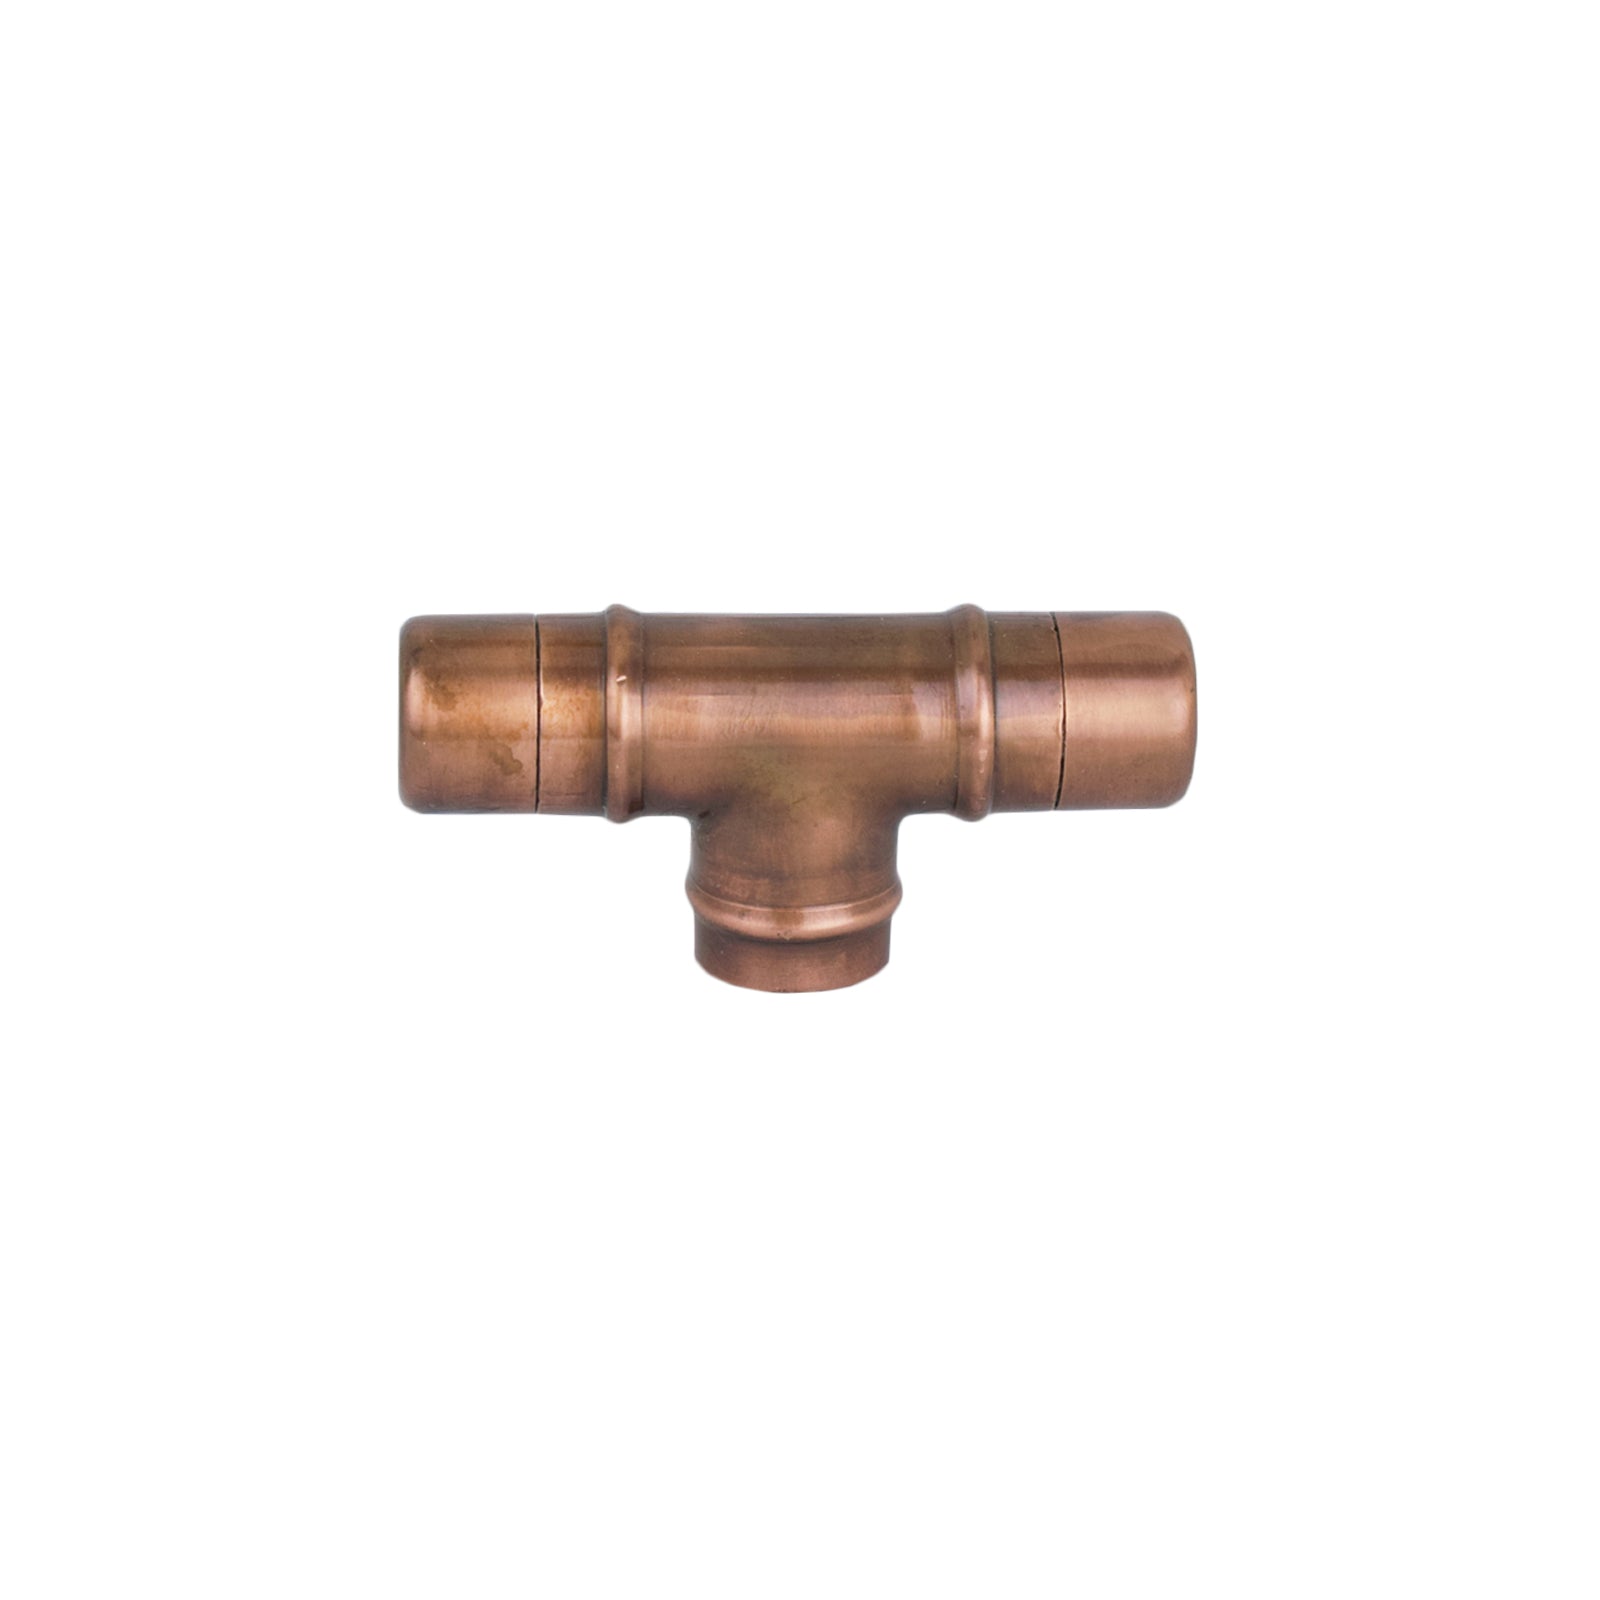 Copper Knob T-shaped - Aged - On White Background